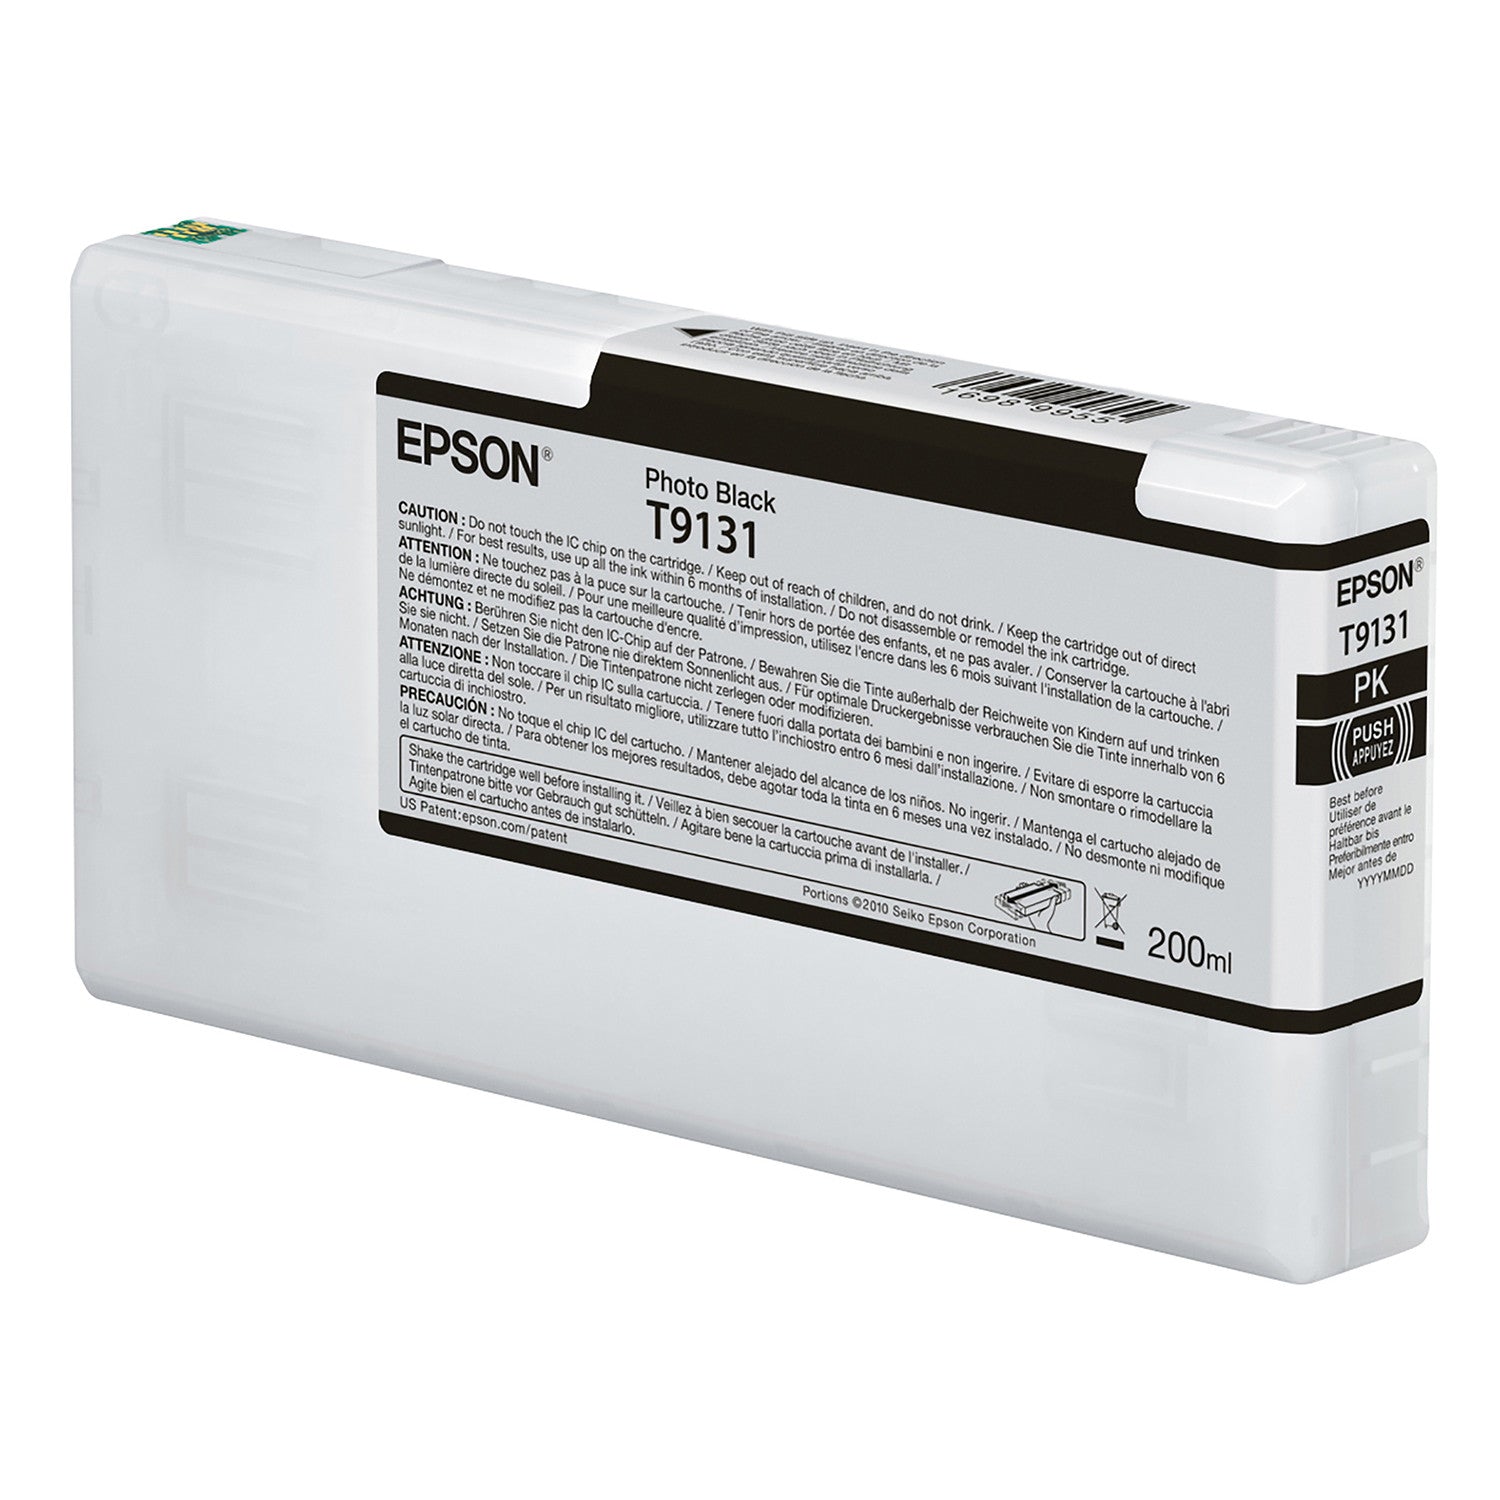 Epson T913100 P5000 Ultrachrome HD Ink 200ml Photo Black, papers printer ink, Epson - Pictureline 